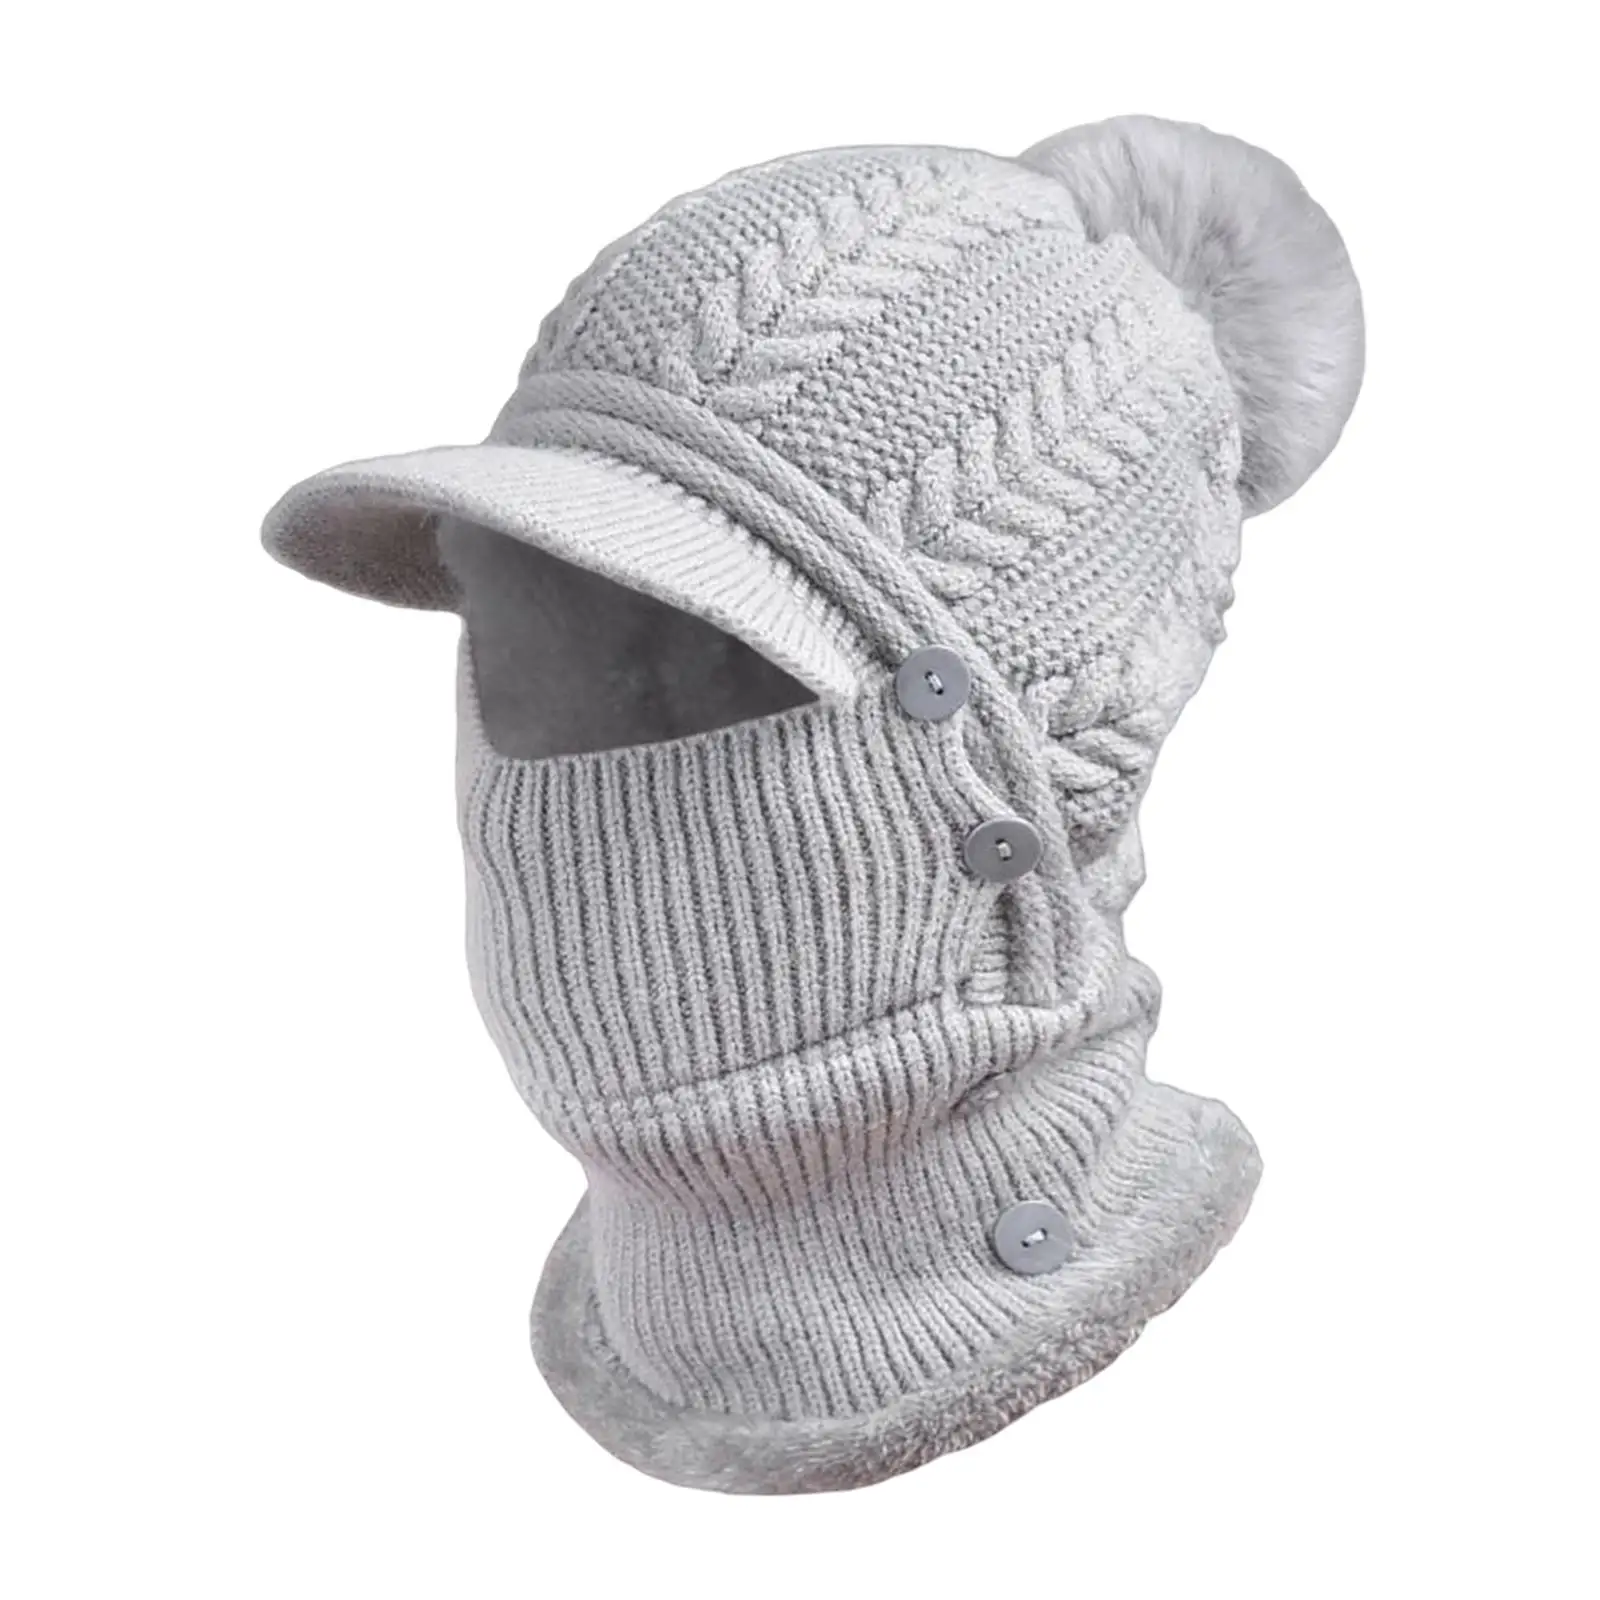 Knit Balaclava Beanie Hat Neck Scarf Protector Button Hat with Ears Covers Winter Ski Mask Cap for Skateboard Snow Women Men